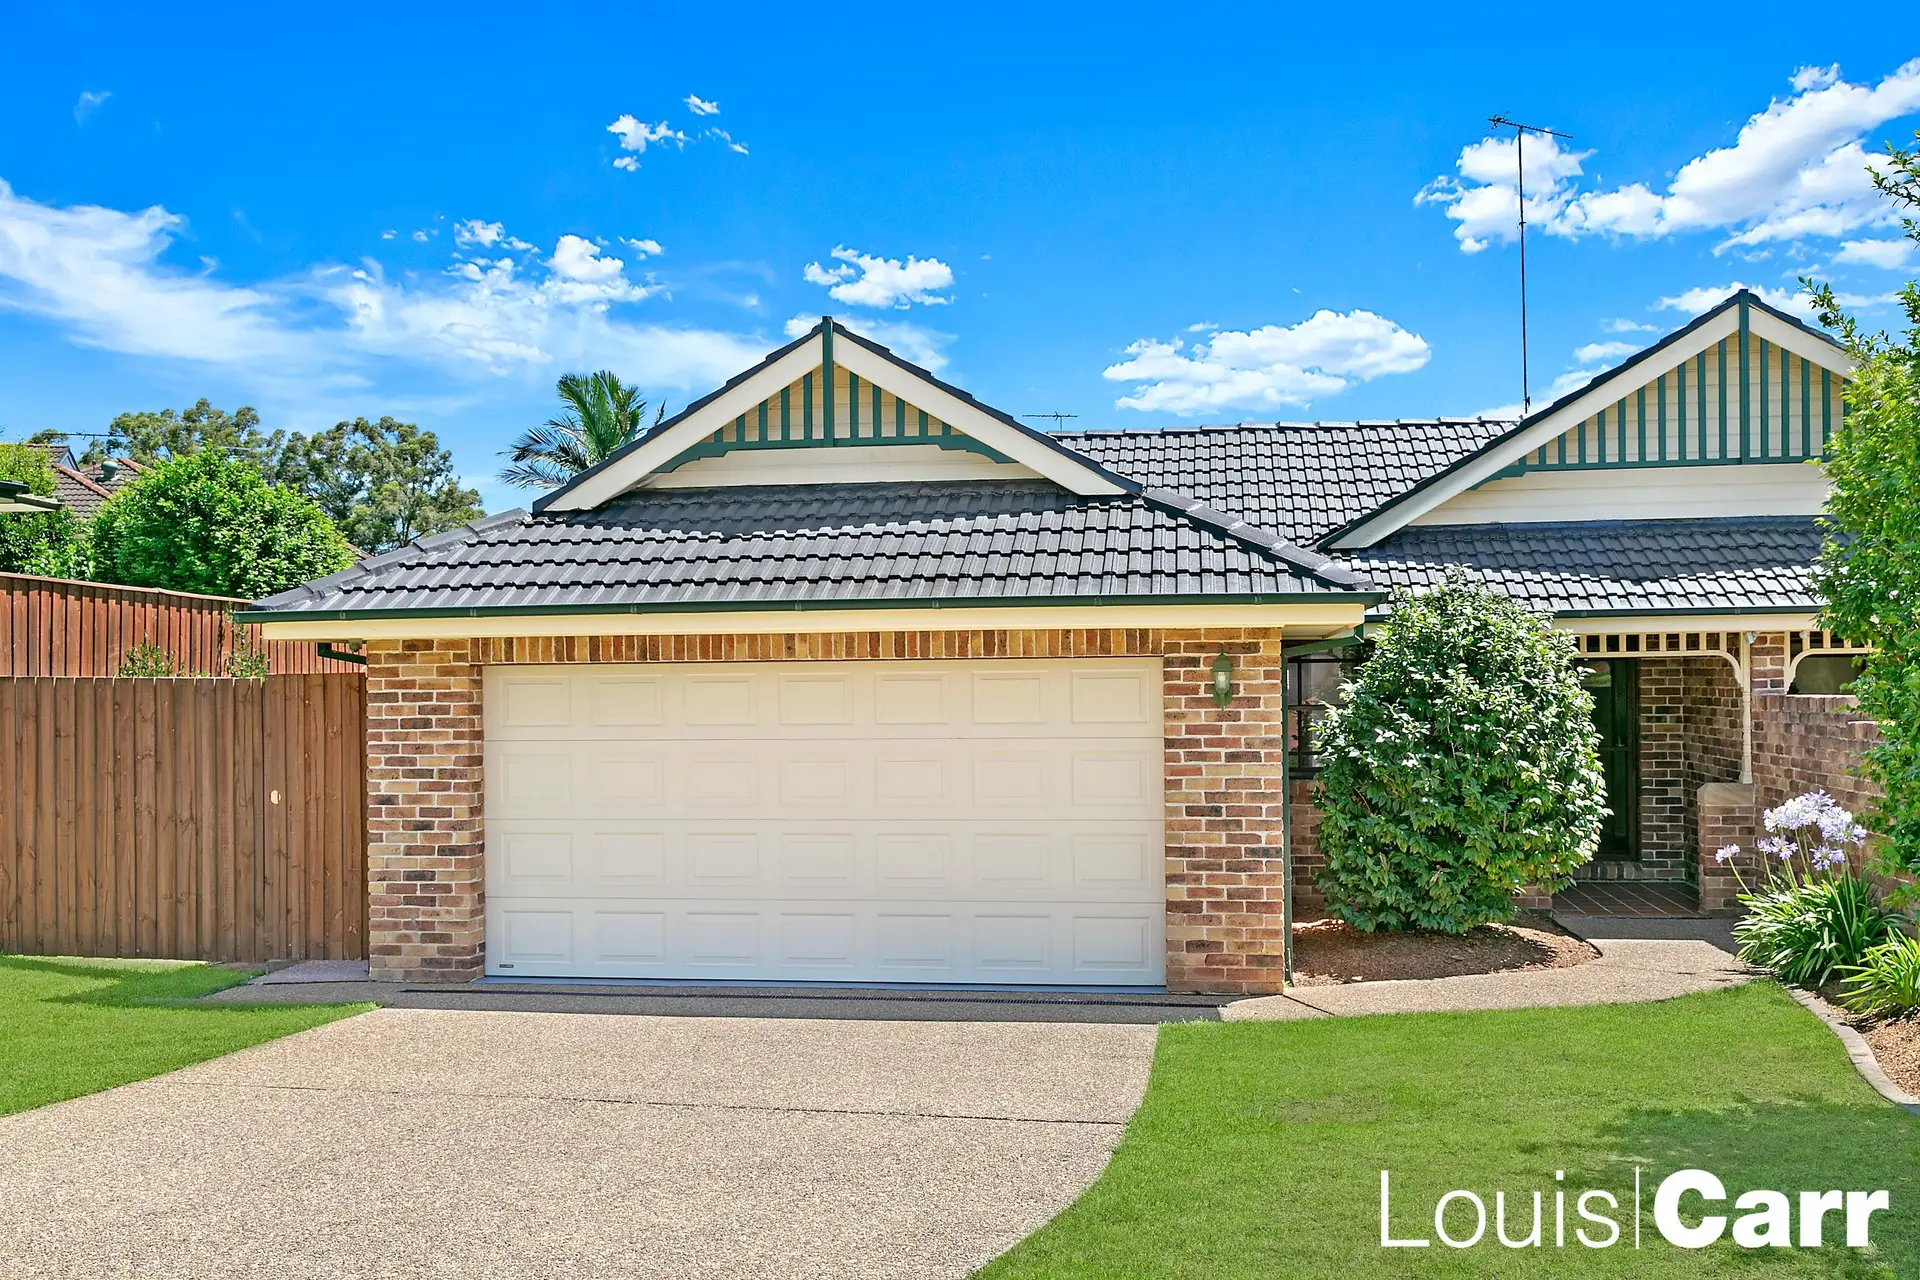 Photo #1: 4 Strathcarron Avenue, Castle Hill - Sold by Louis Carr Real Estate